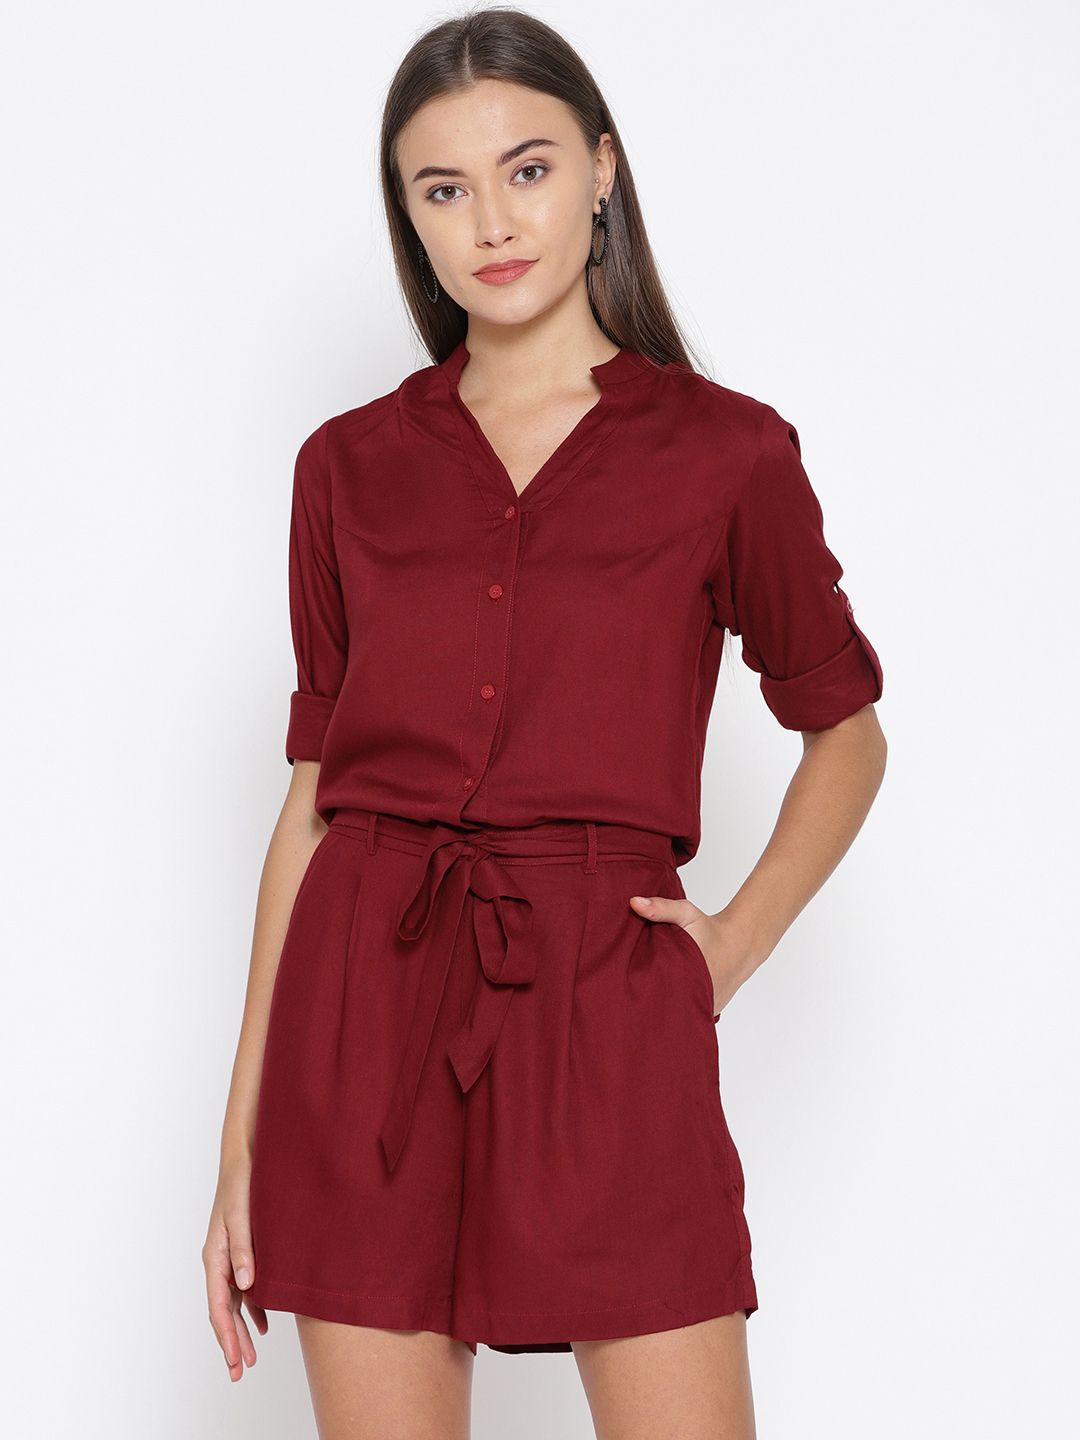 MABISH by Sonal Jain Women Maroon Solid Playsuit Price in India